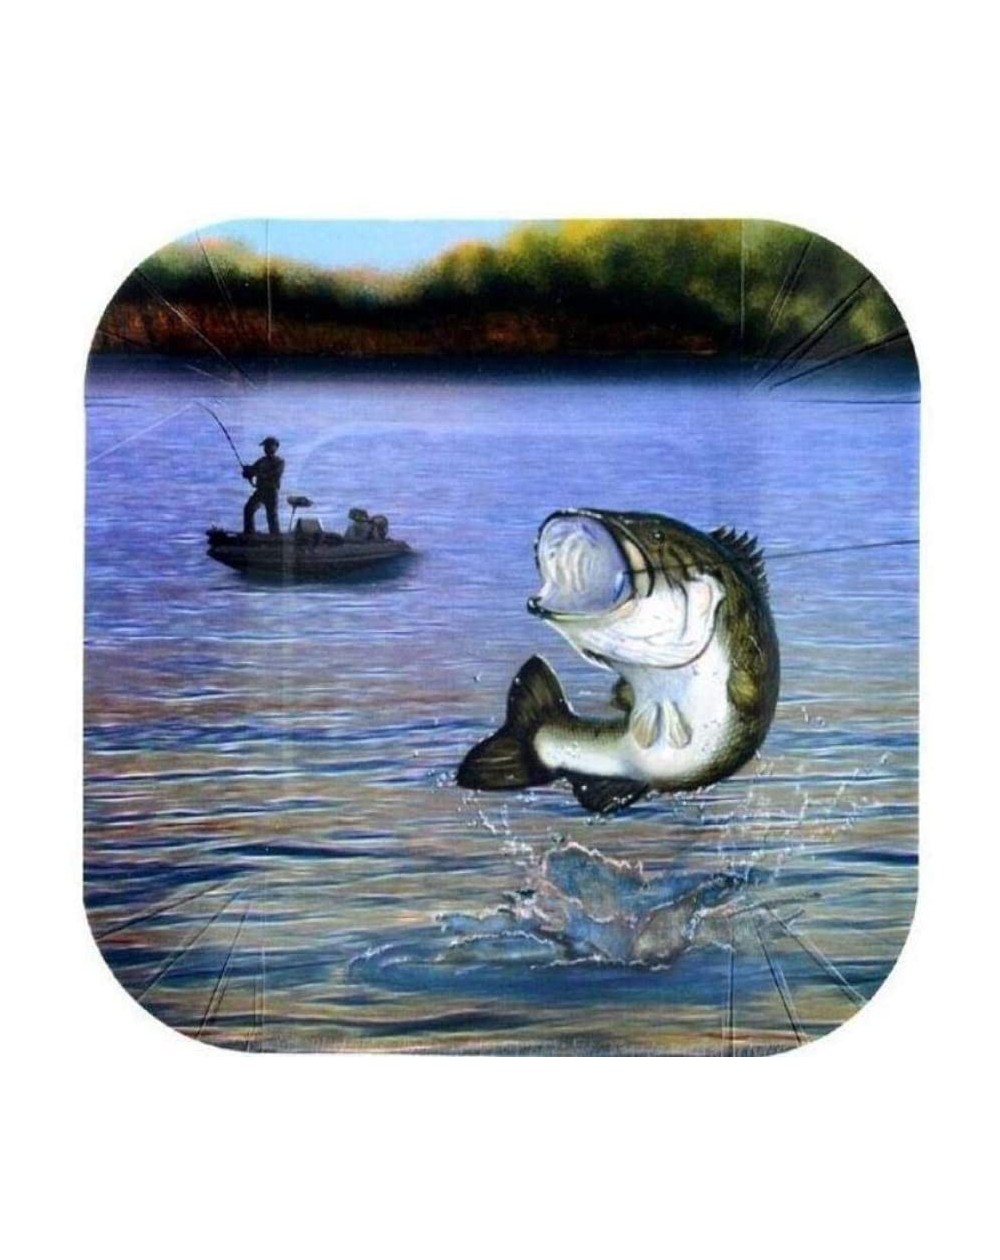 Party Tableware Fishing Dessert Plate (7"- Square- Paper Plates - 8 Pack) Gone Fishin' Party Collection - C312J6KS1K7 $11.18